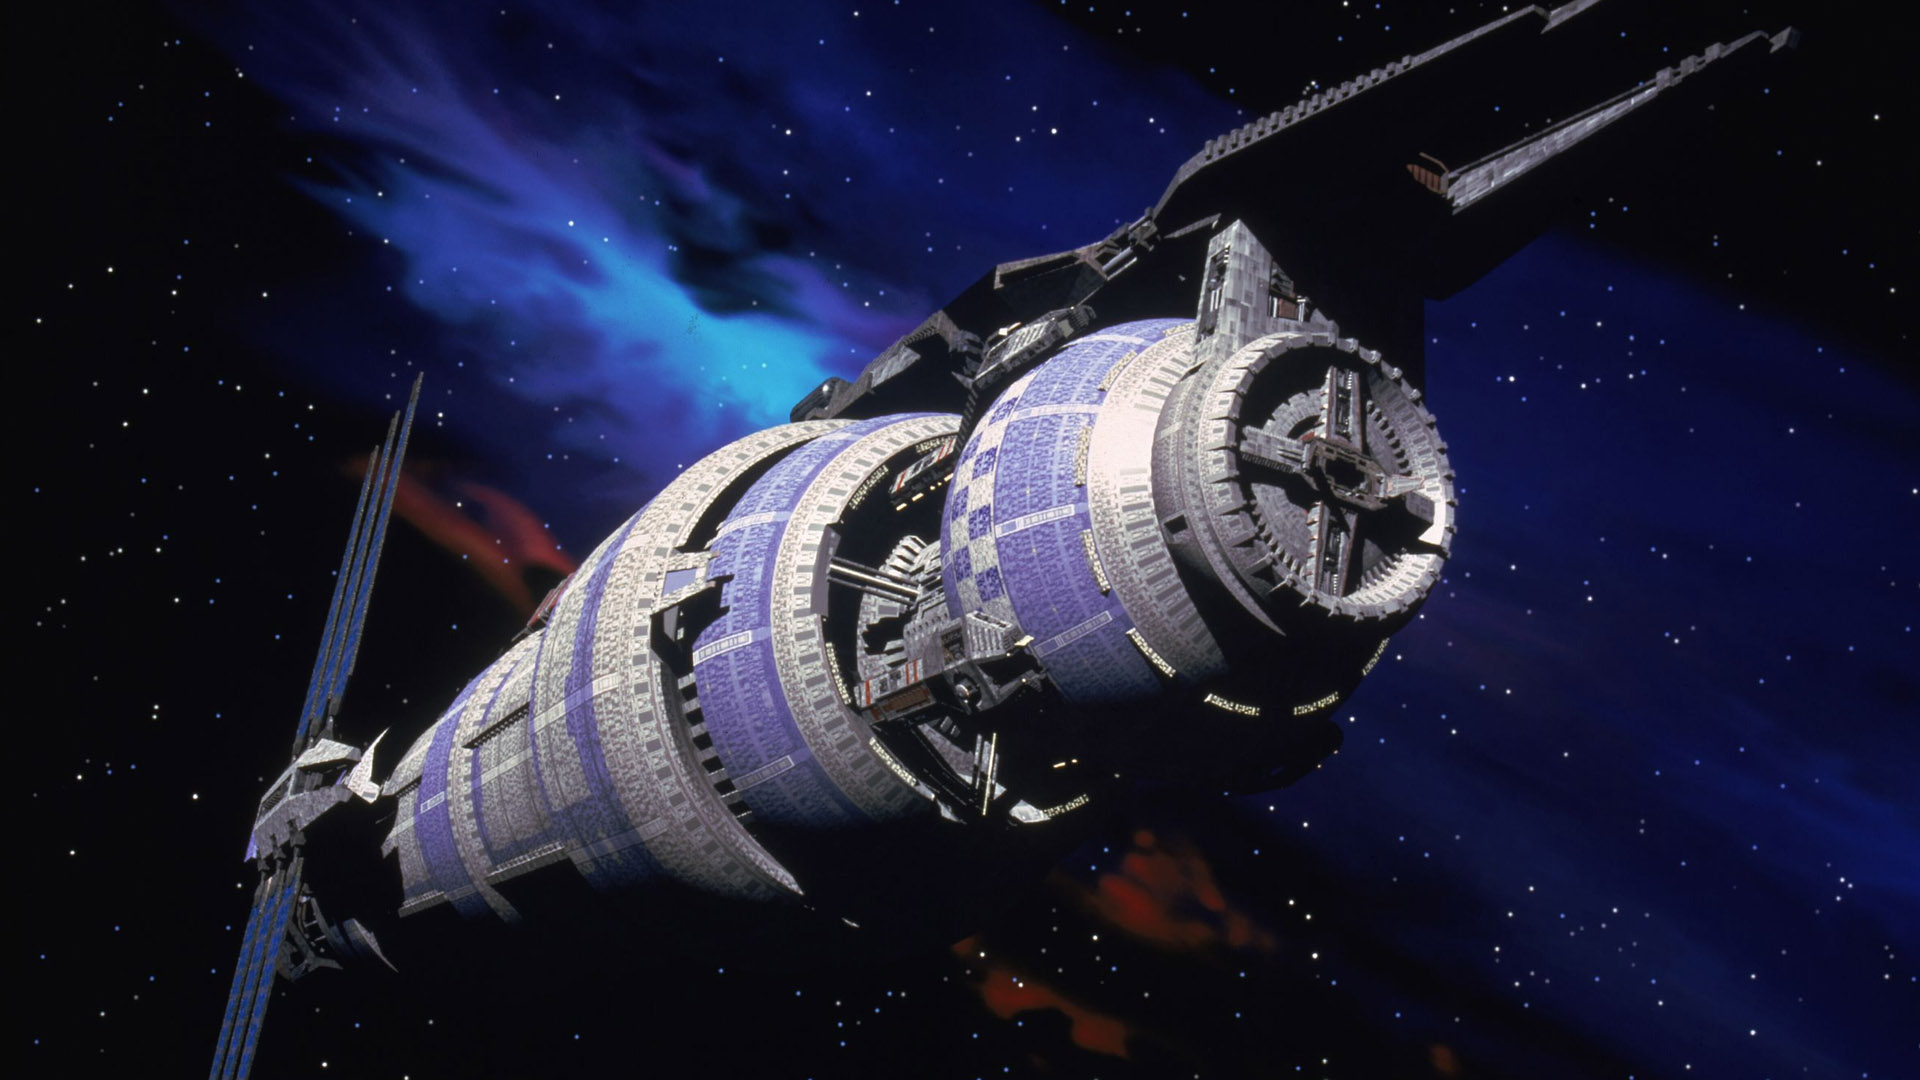 Babylon 5 is Coming to Amazon Prime in June